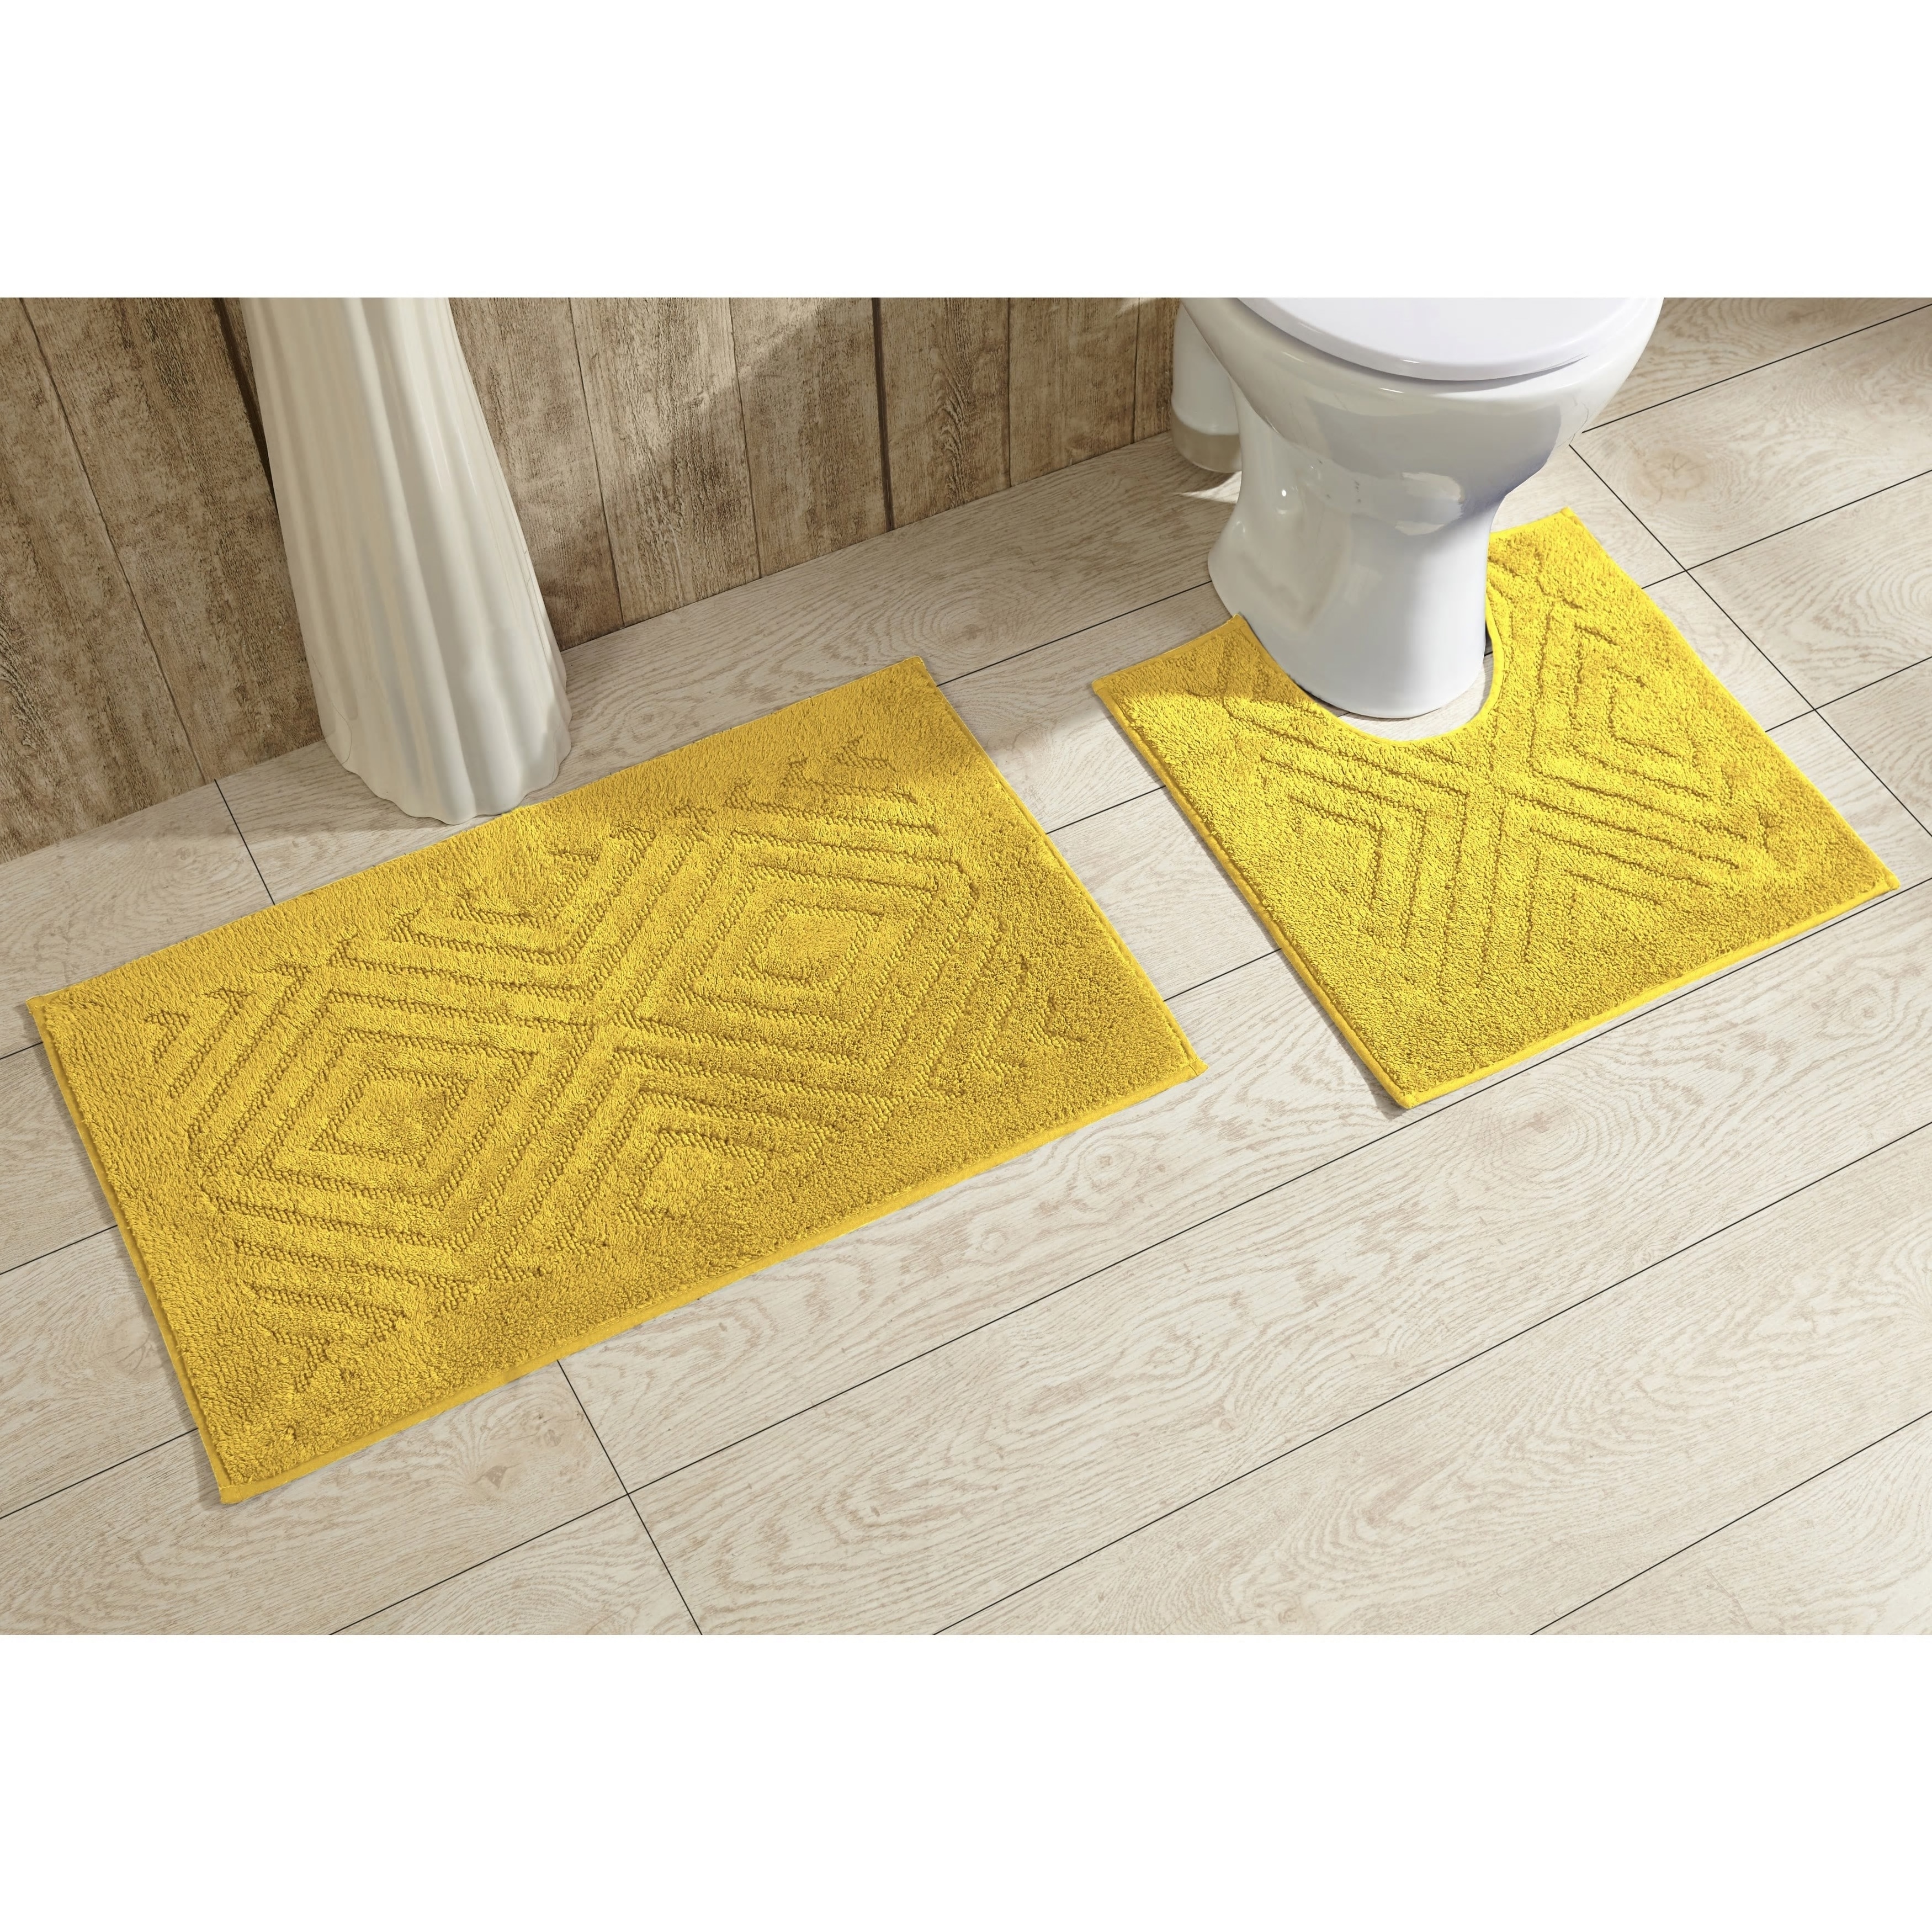 https://ak1.ostkcdn.com/images/products/is/images/direct/ce66f58ea73e2abfceb3489c14088da2c67fbce6/Trier-Cotton-Non-skid-2-piece-Contour-and-Bath-Rug-Set-by-Better-Trends.jpg